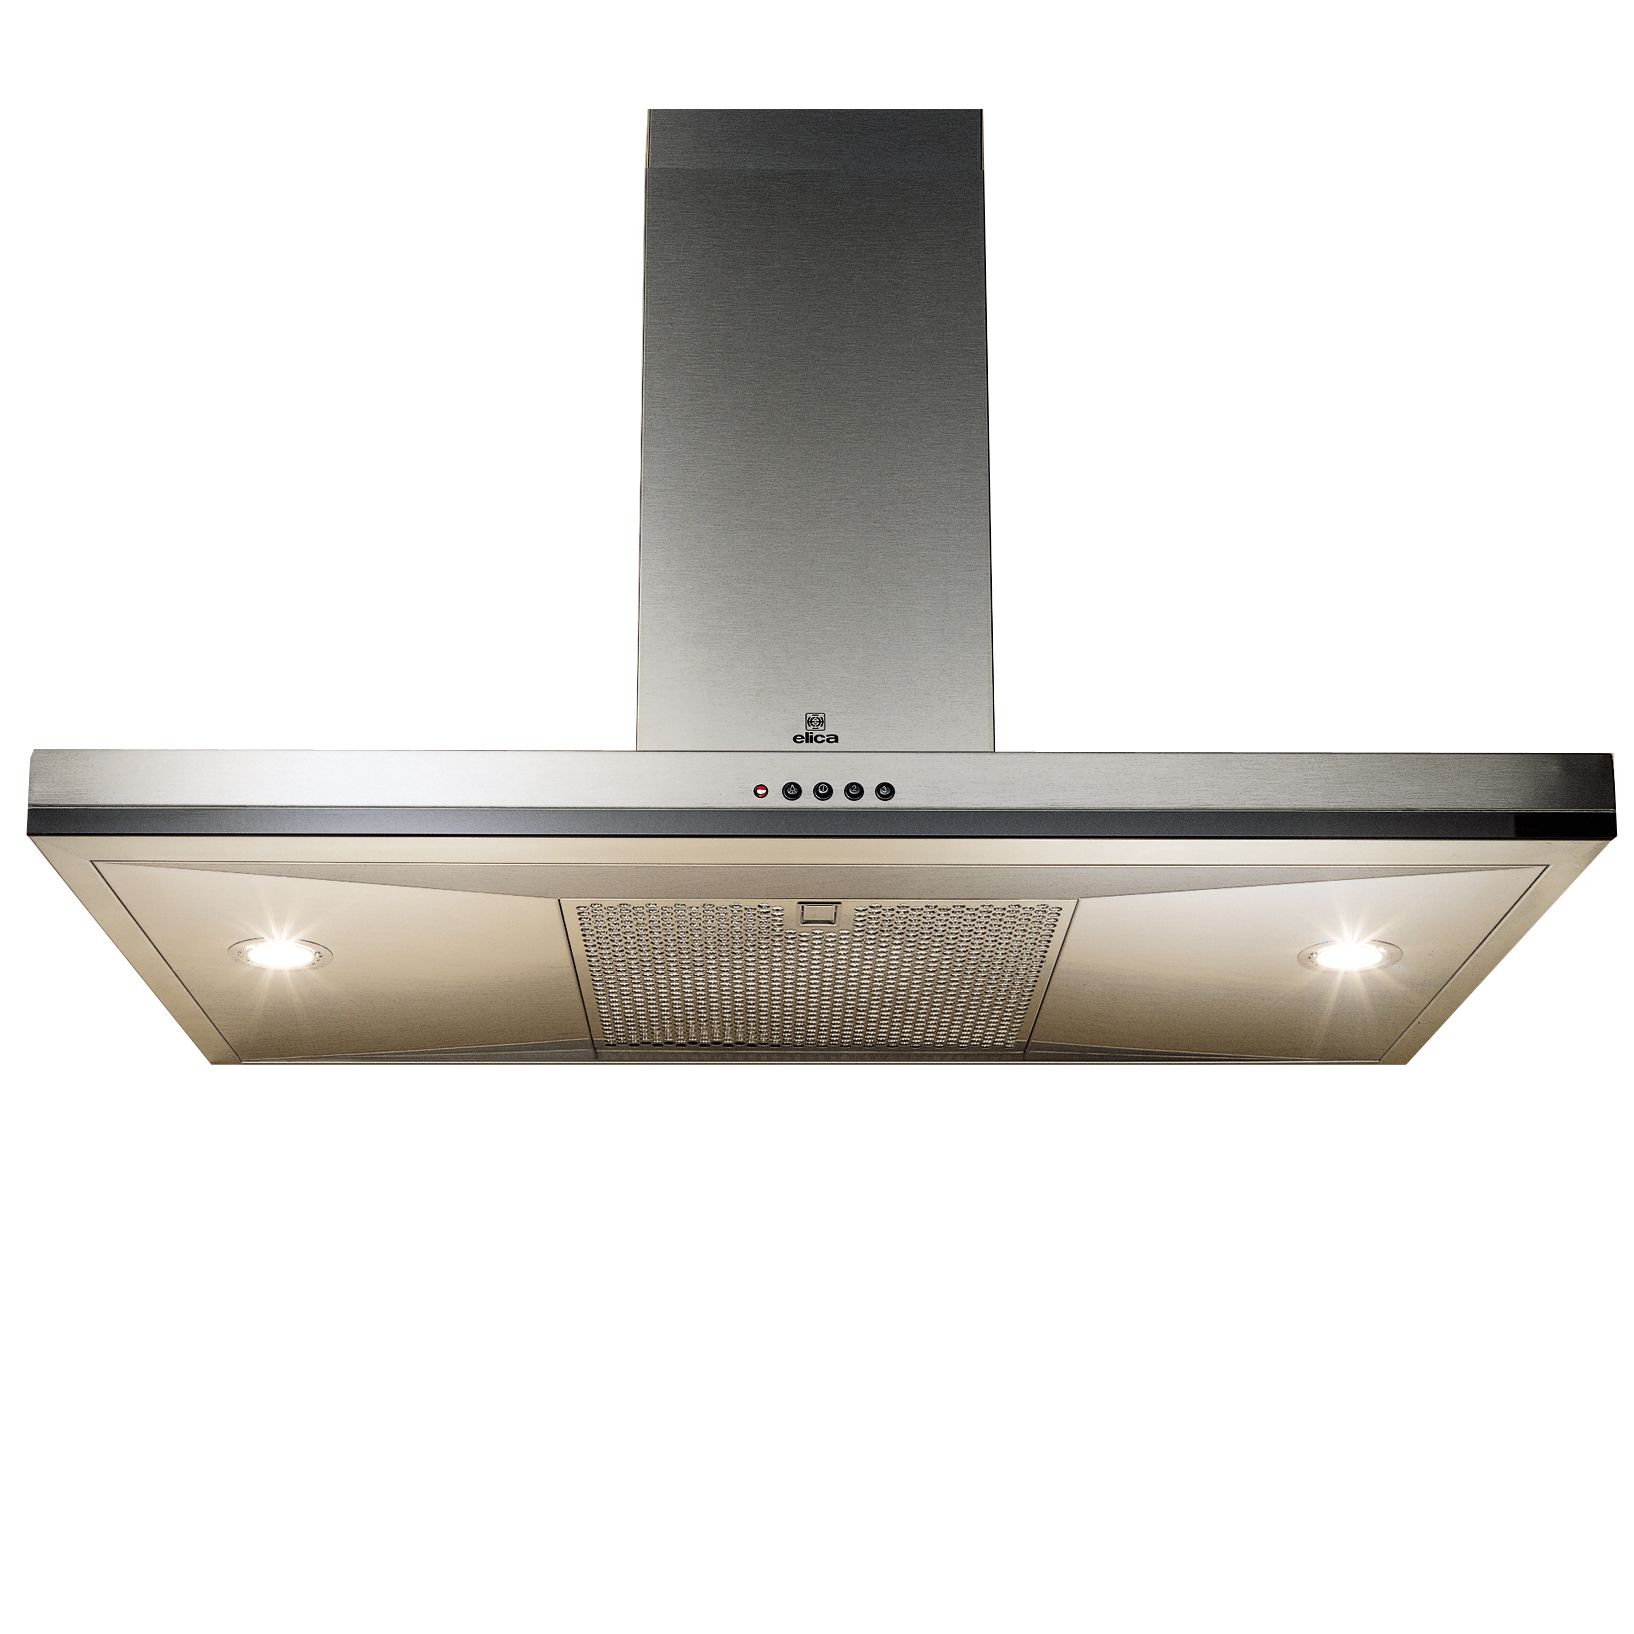 Elica Concept Cube 90 Chimney Cooker Hood, Stainless Steel at John Lewis